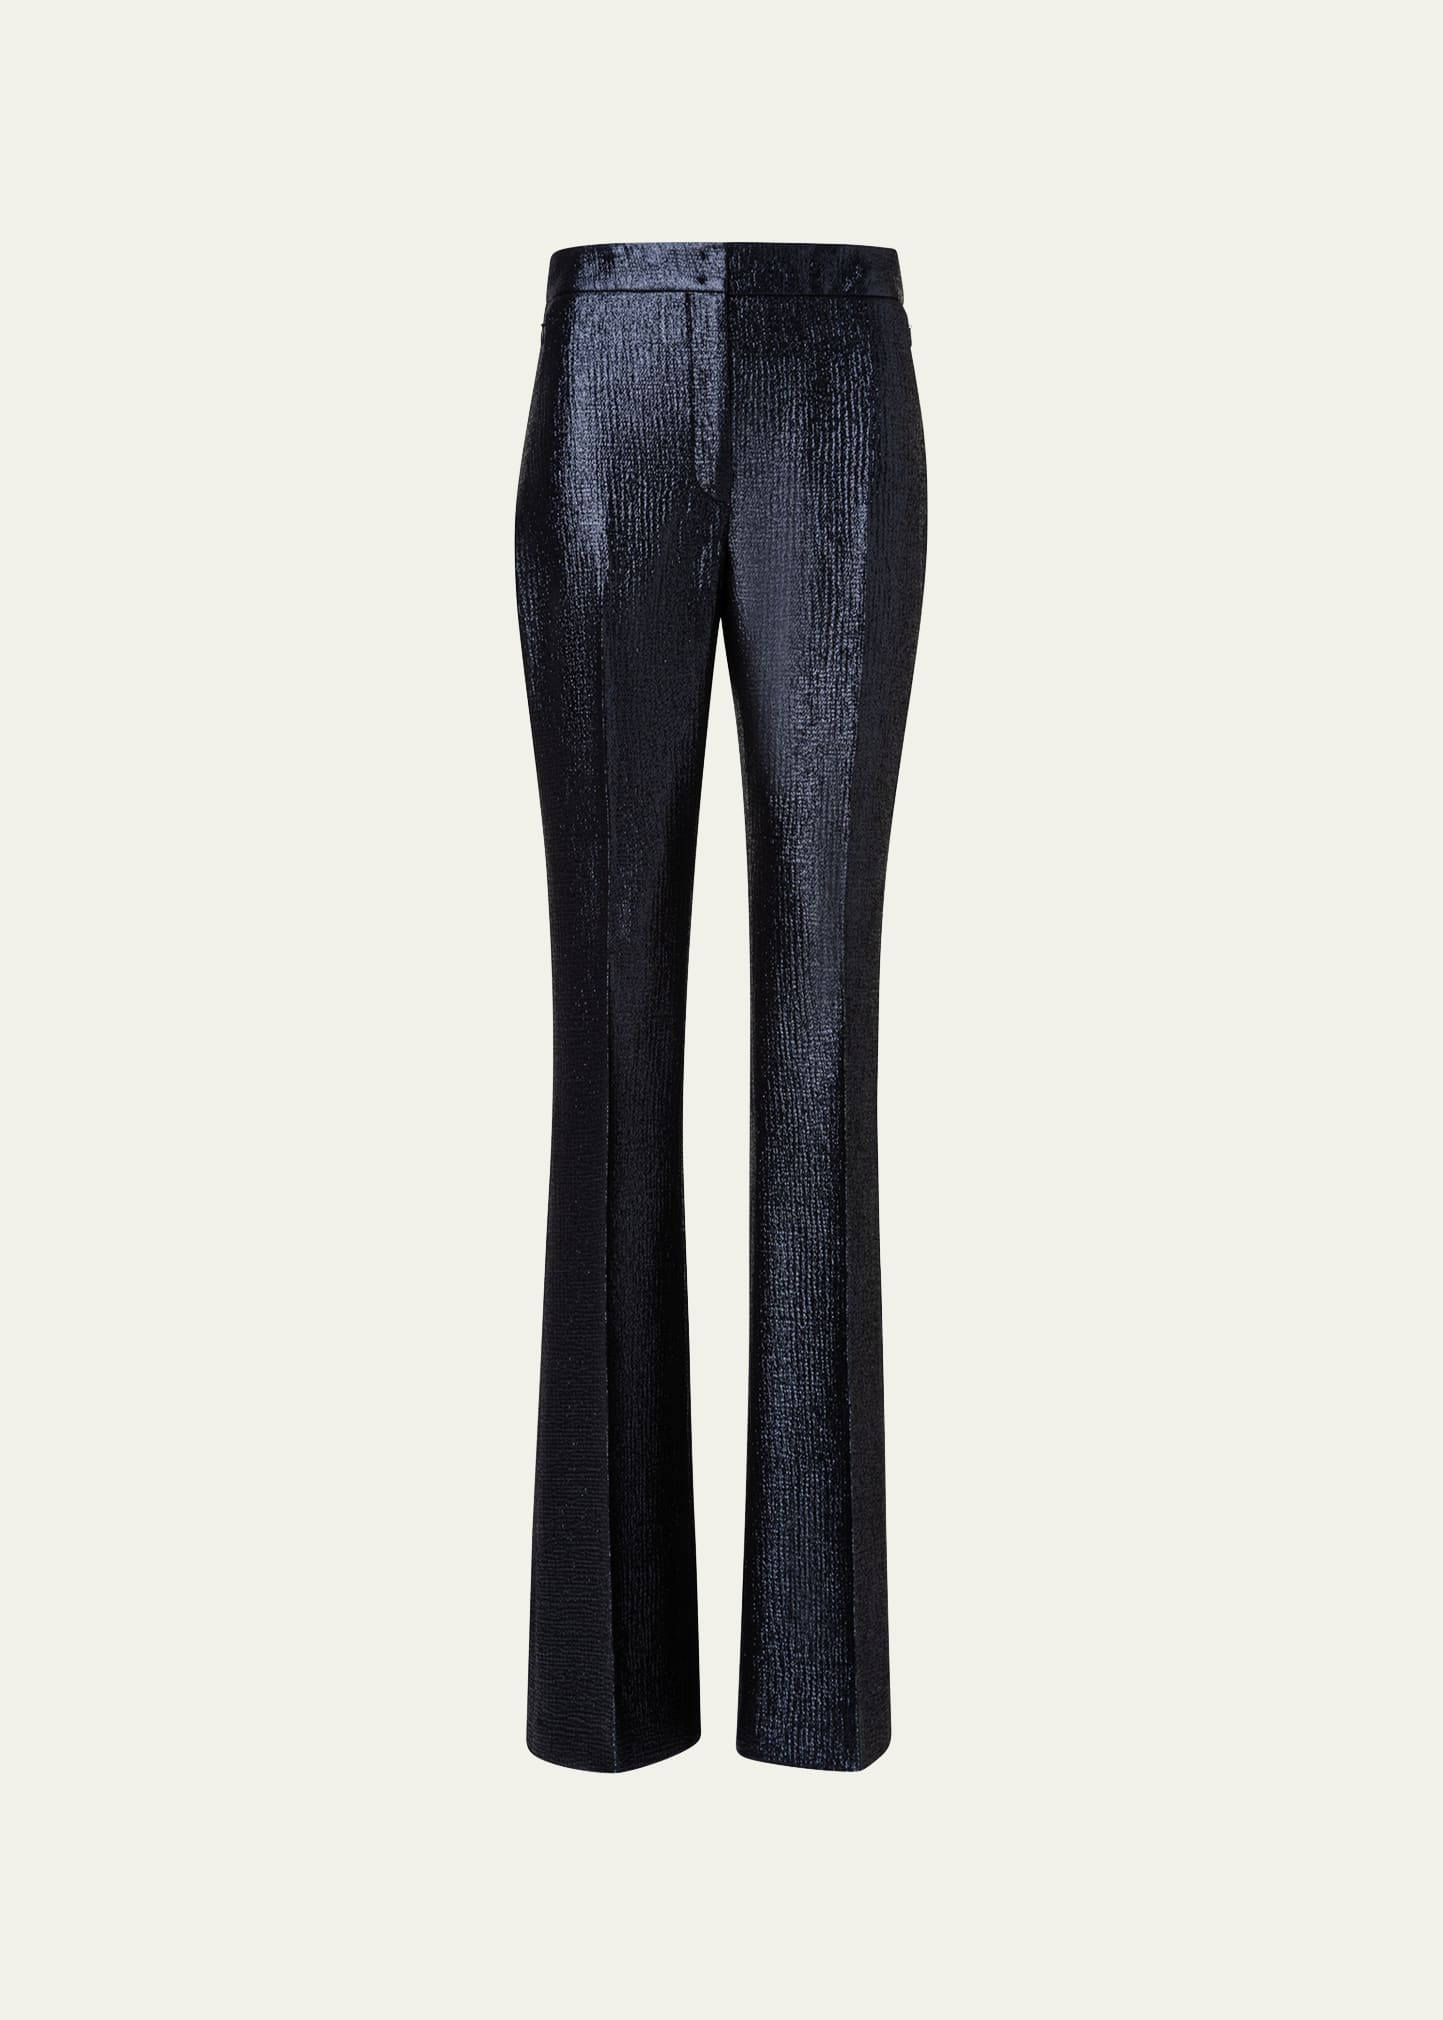 Akris Farida Structured Lurex Bootcut Pants In Charcoal Grey